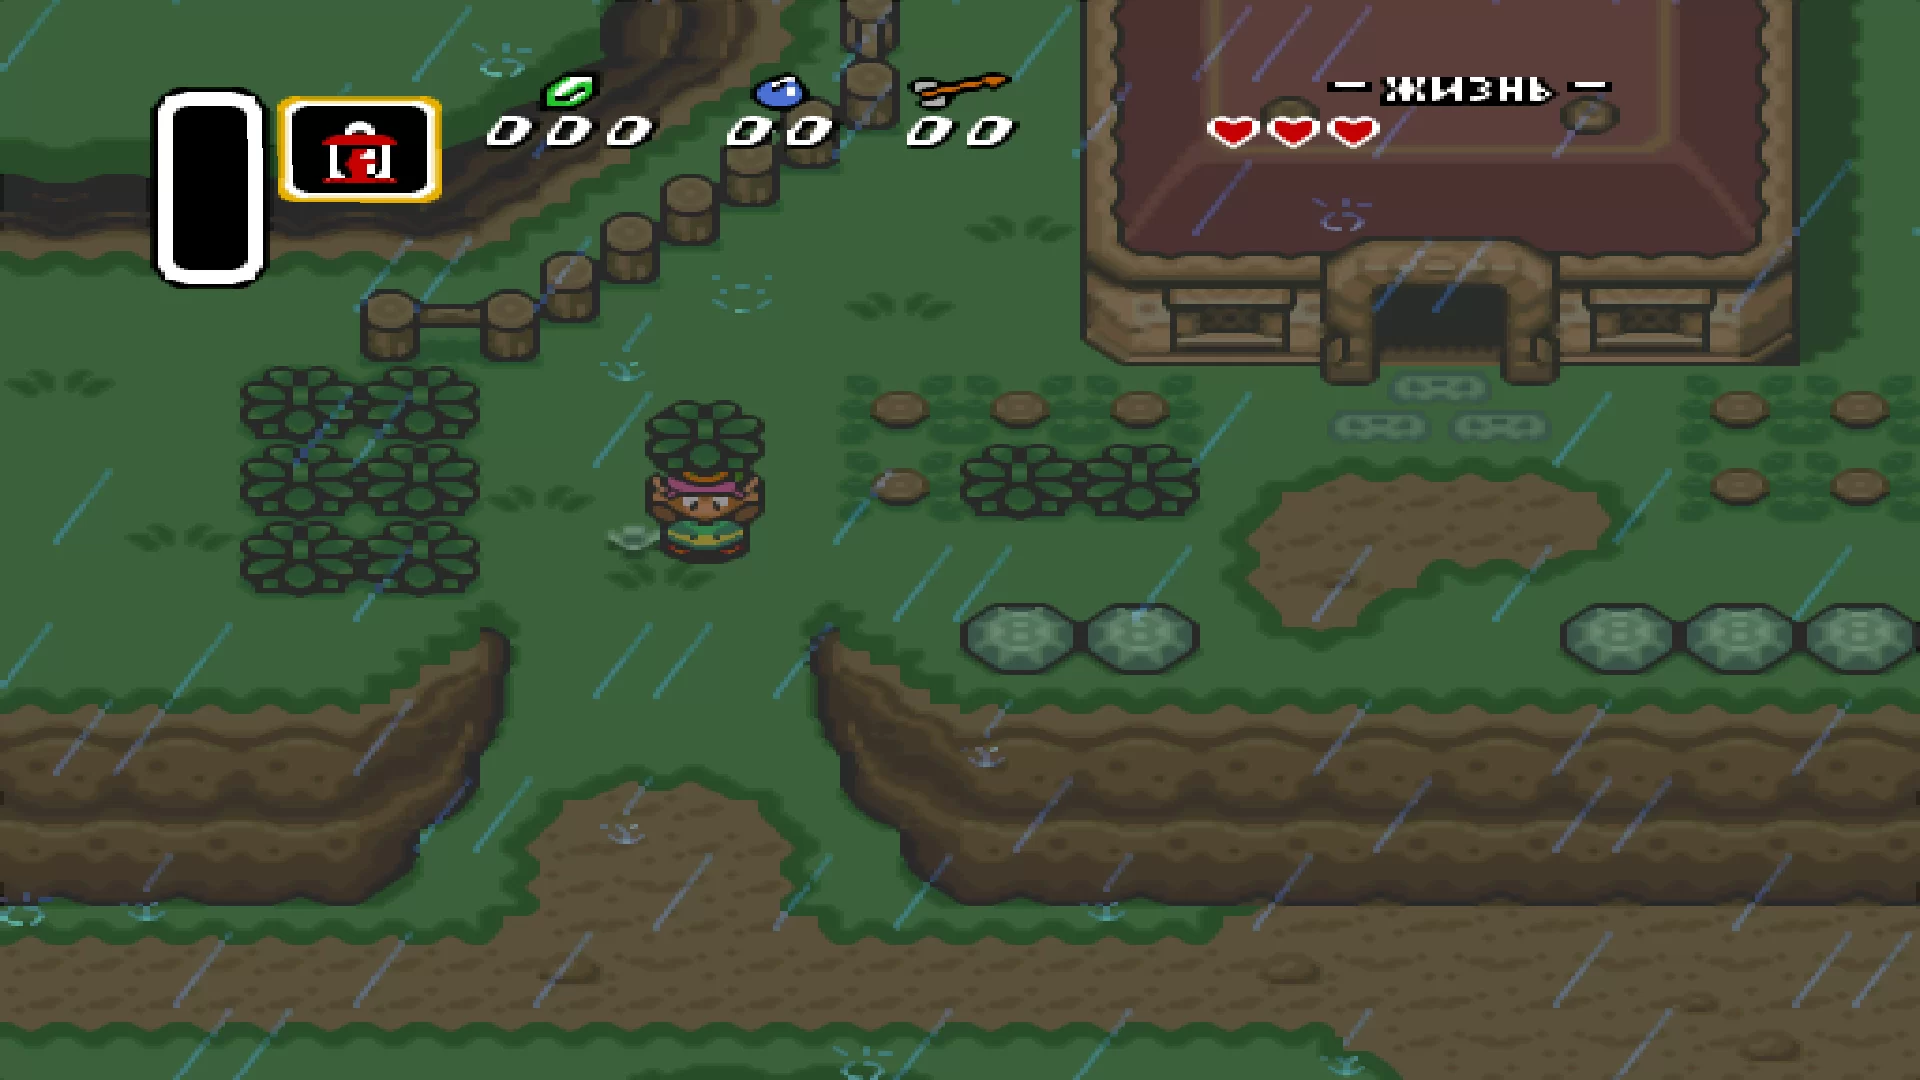 Buy The Legend of Zelda: A Link to the Past for SNES